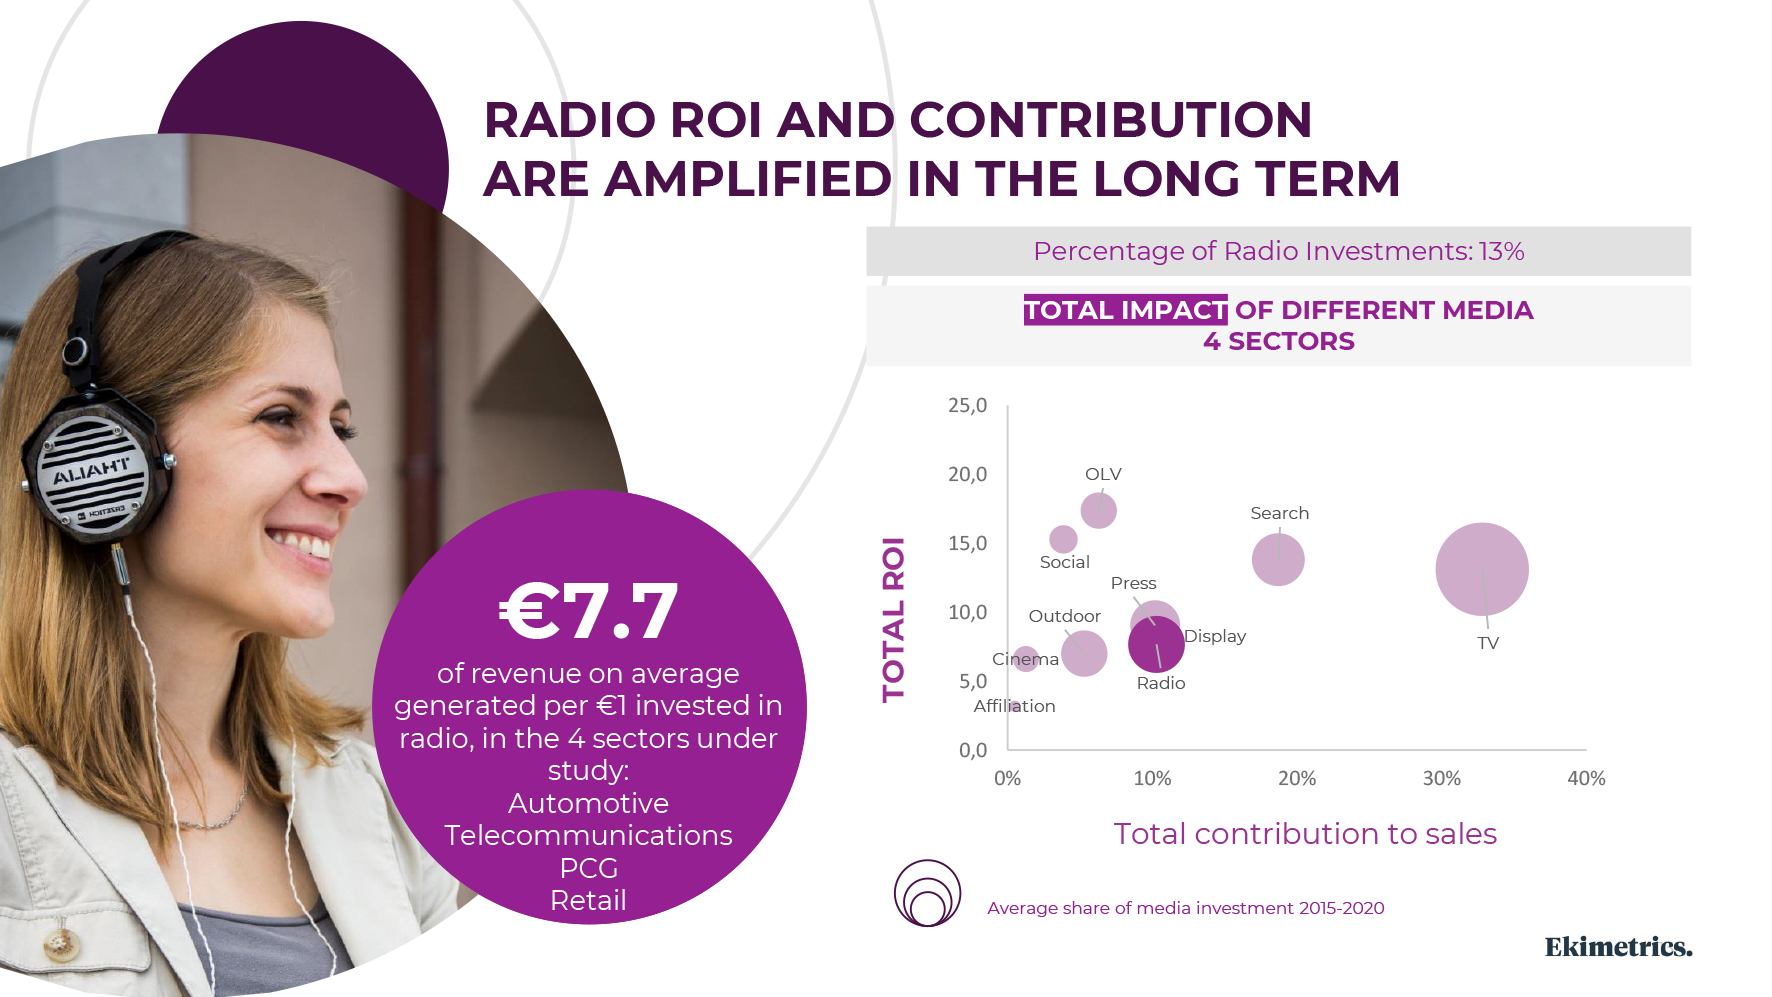 Grafik: Radio ROI and contribution are ampliefied in the long term